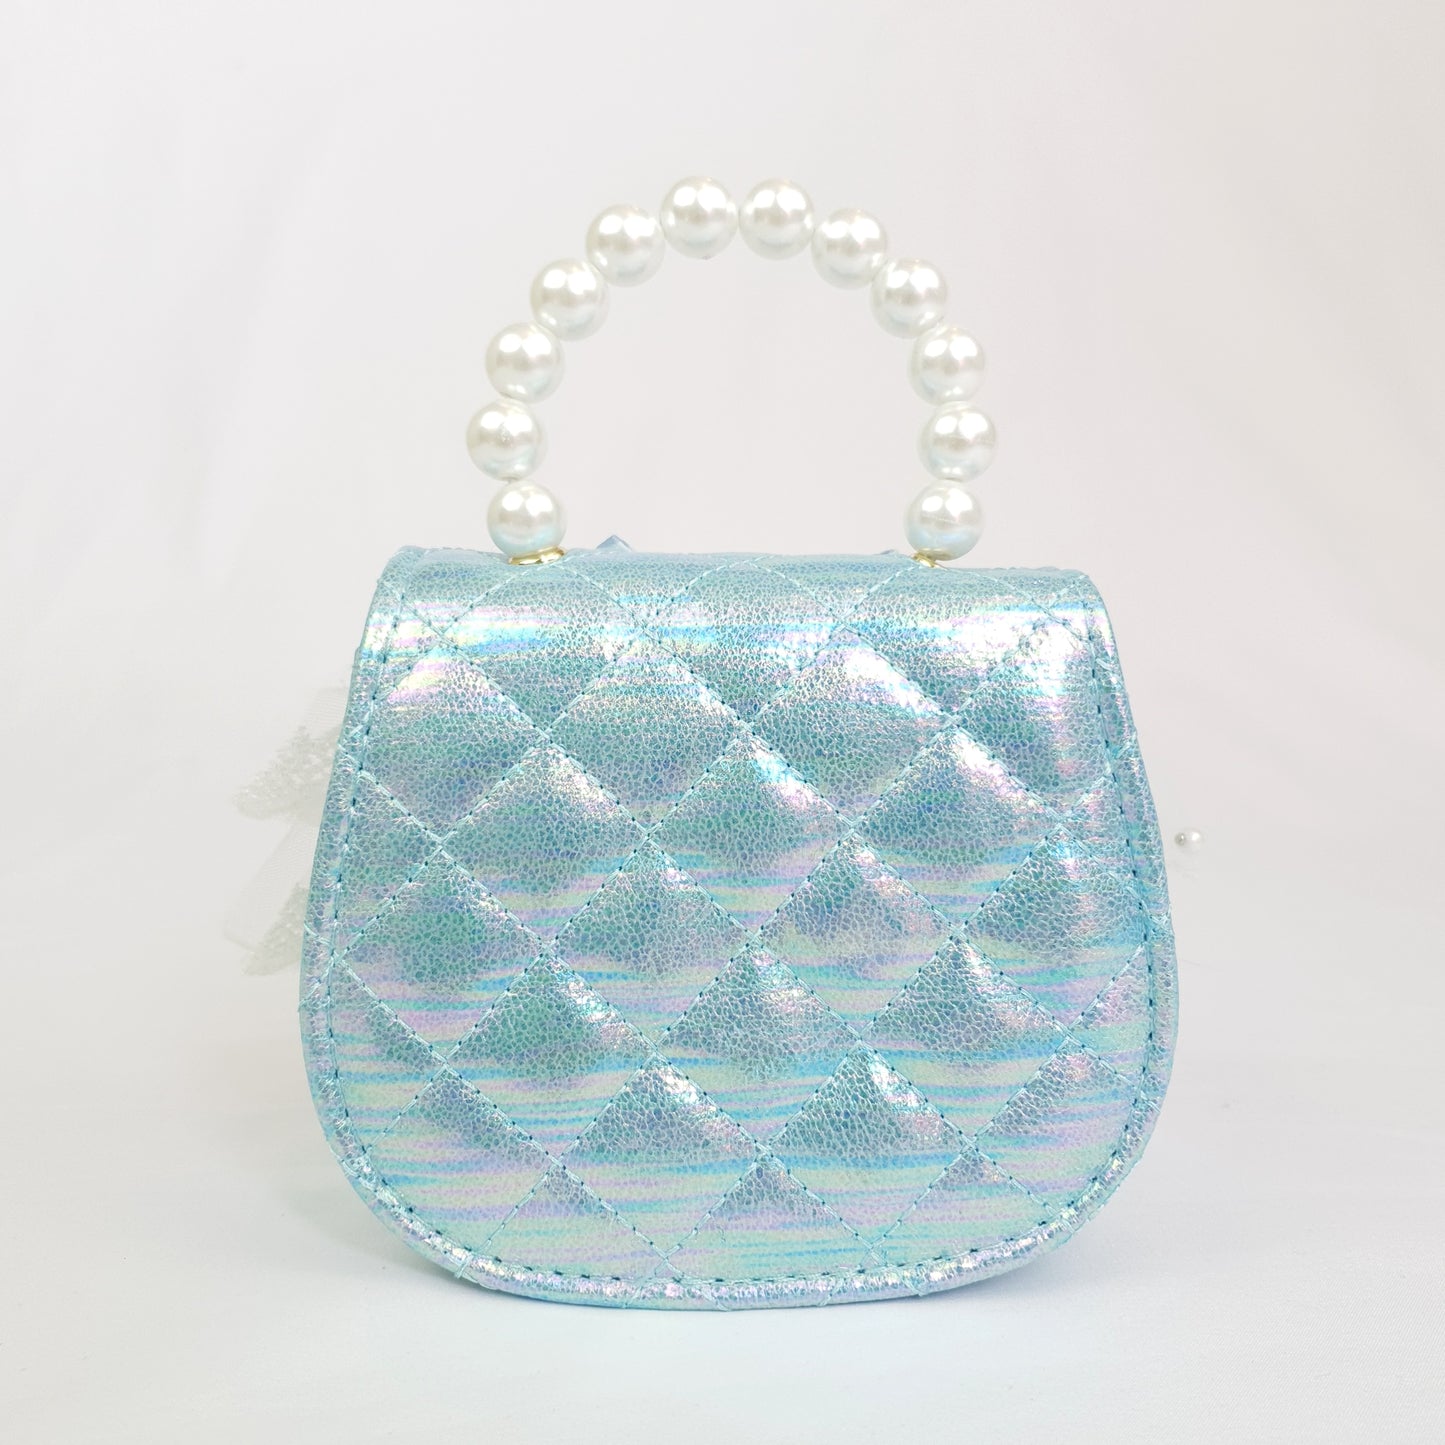 Quilted blue bag with frilly lace